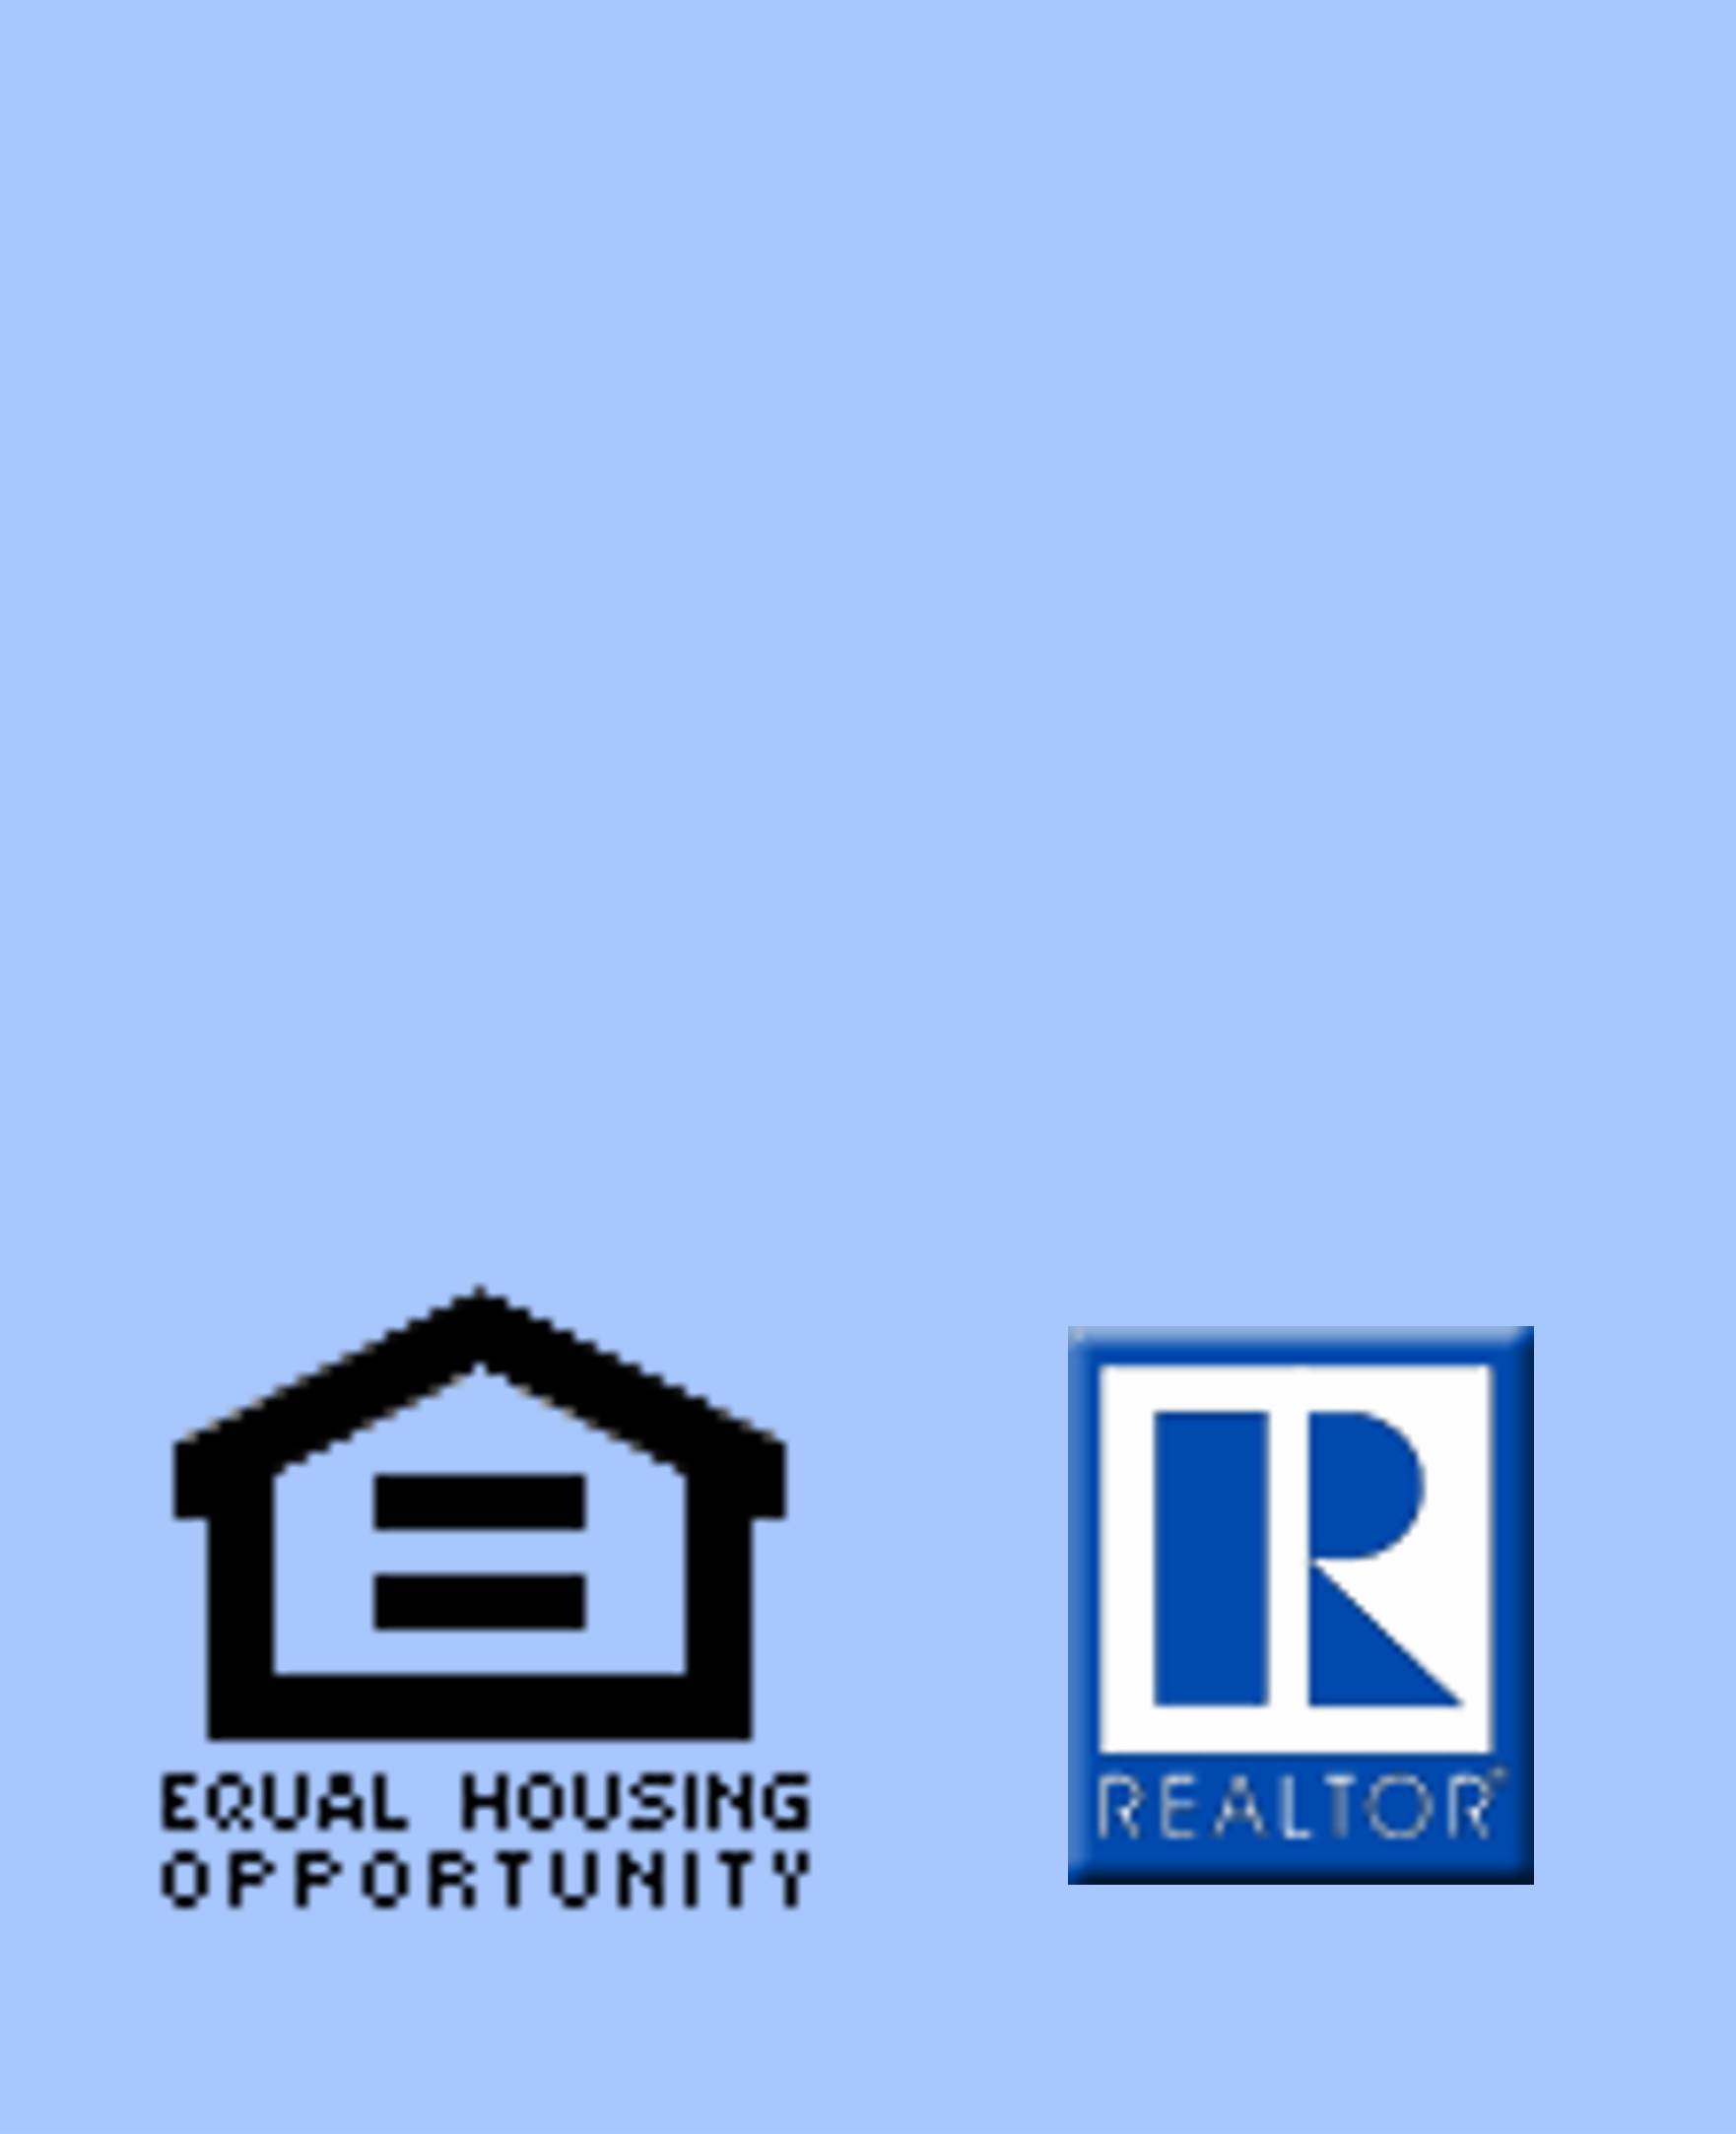 Equal Housing Opportunity and Realtor logos